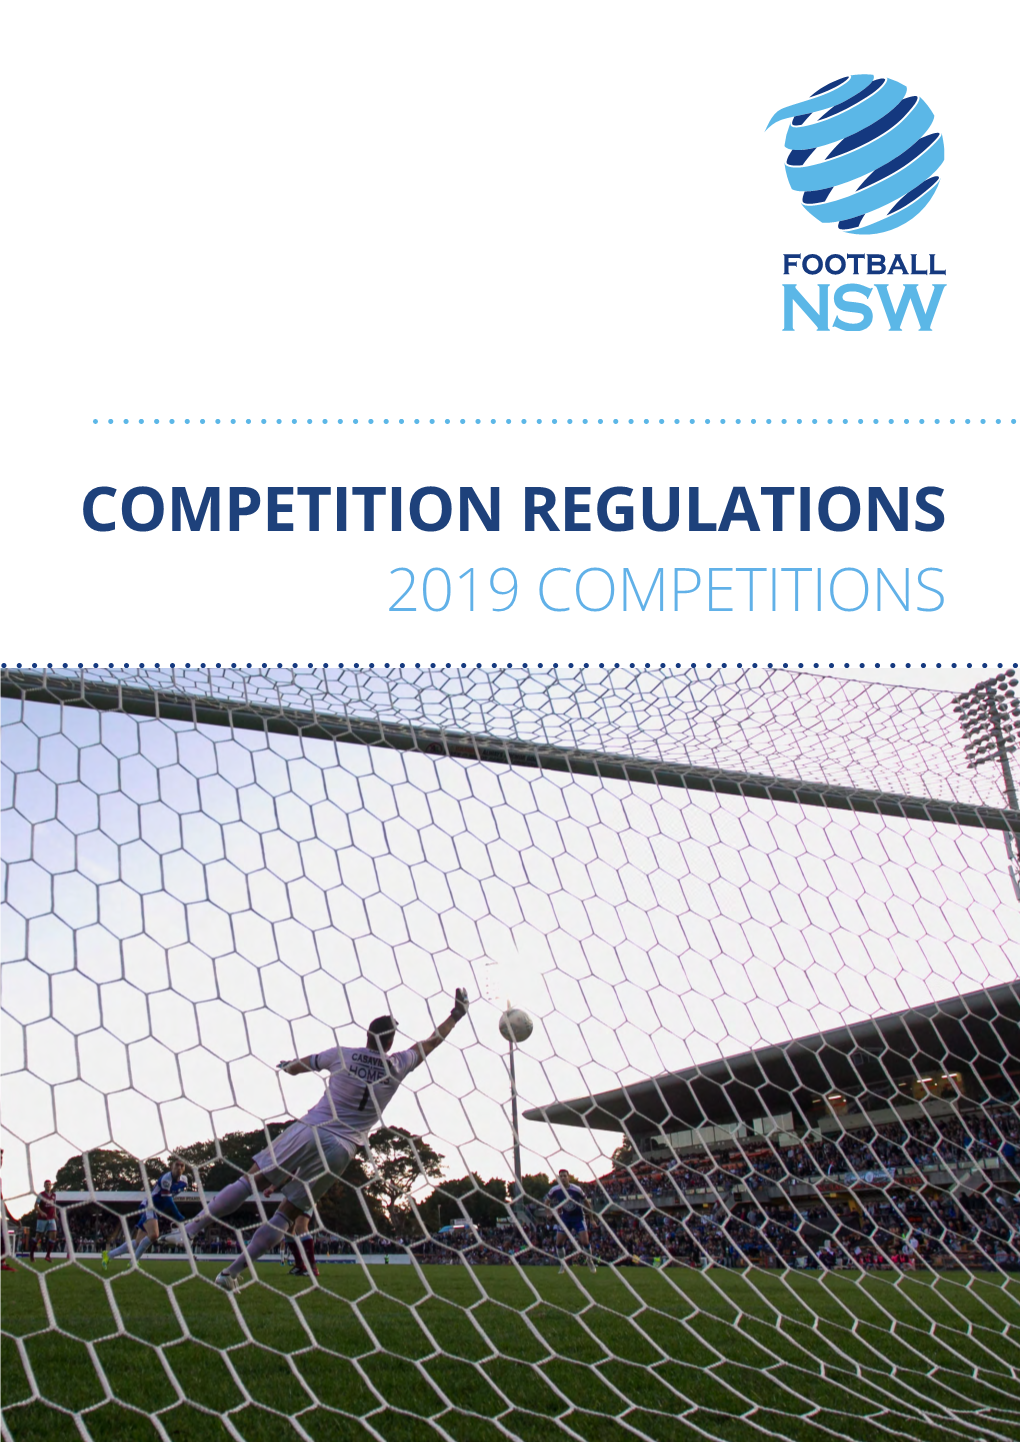 COMPETITION REGULATIONS 2019 COMPETITIONS Contents